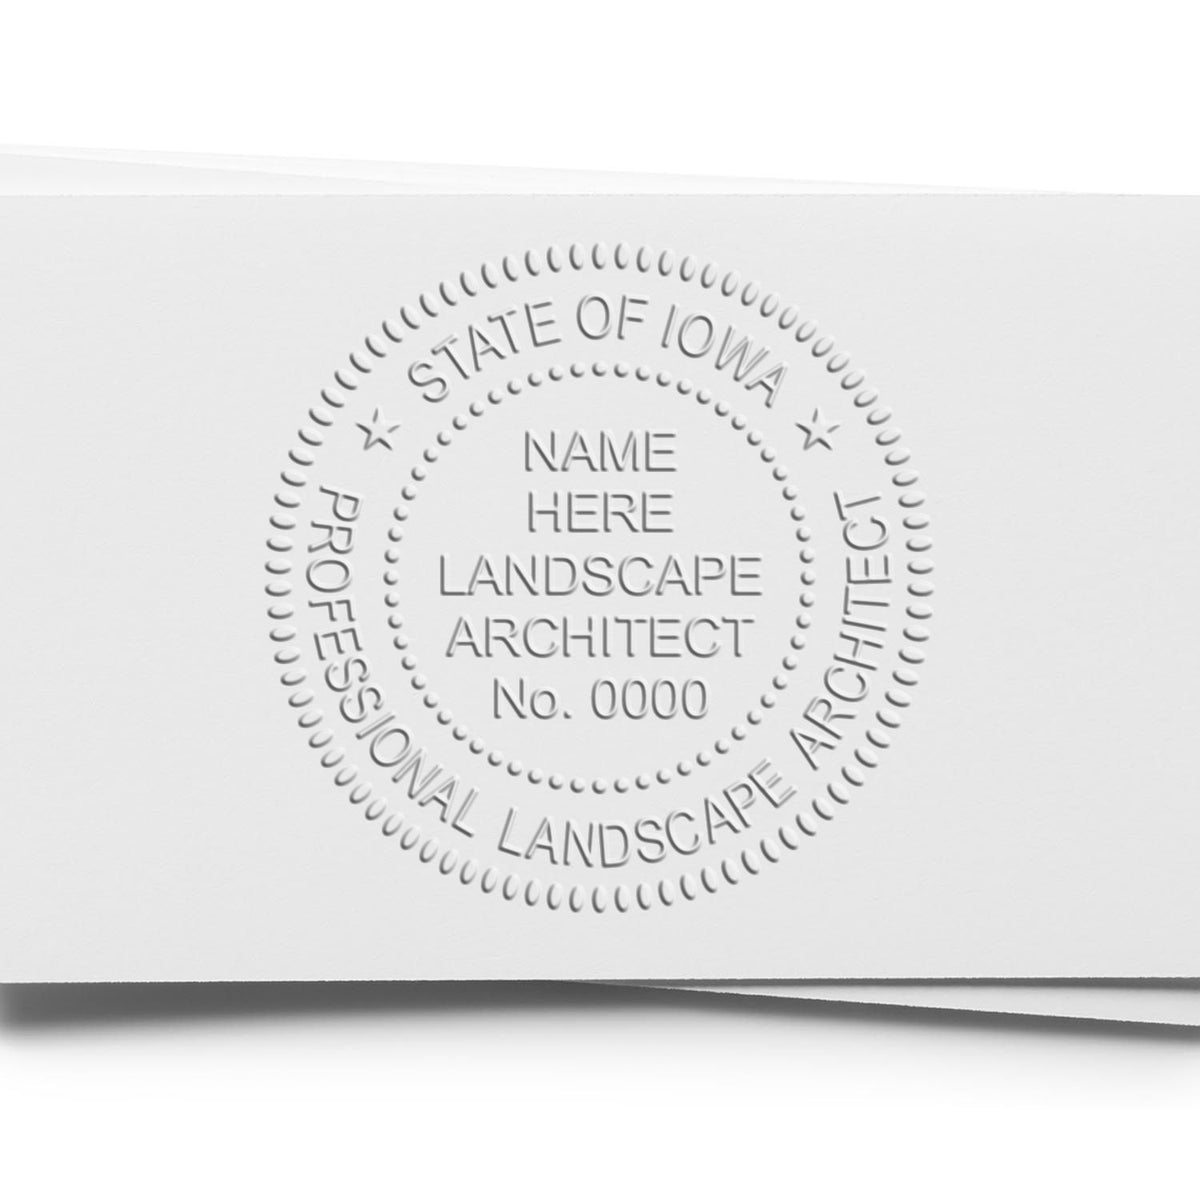 A stamped impression of the Soft Pocket Iowa Landscape Architect Embosser in this stylish lifestyle photo, setting the tone for a unique and personalized product.